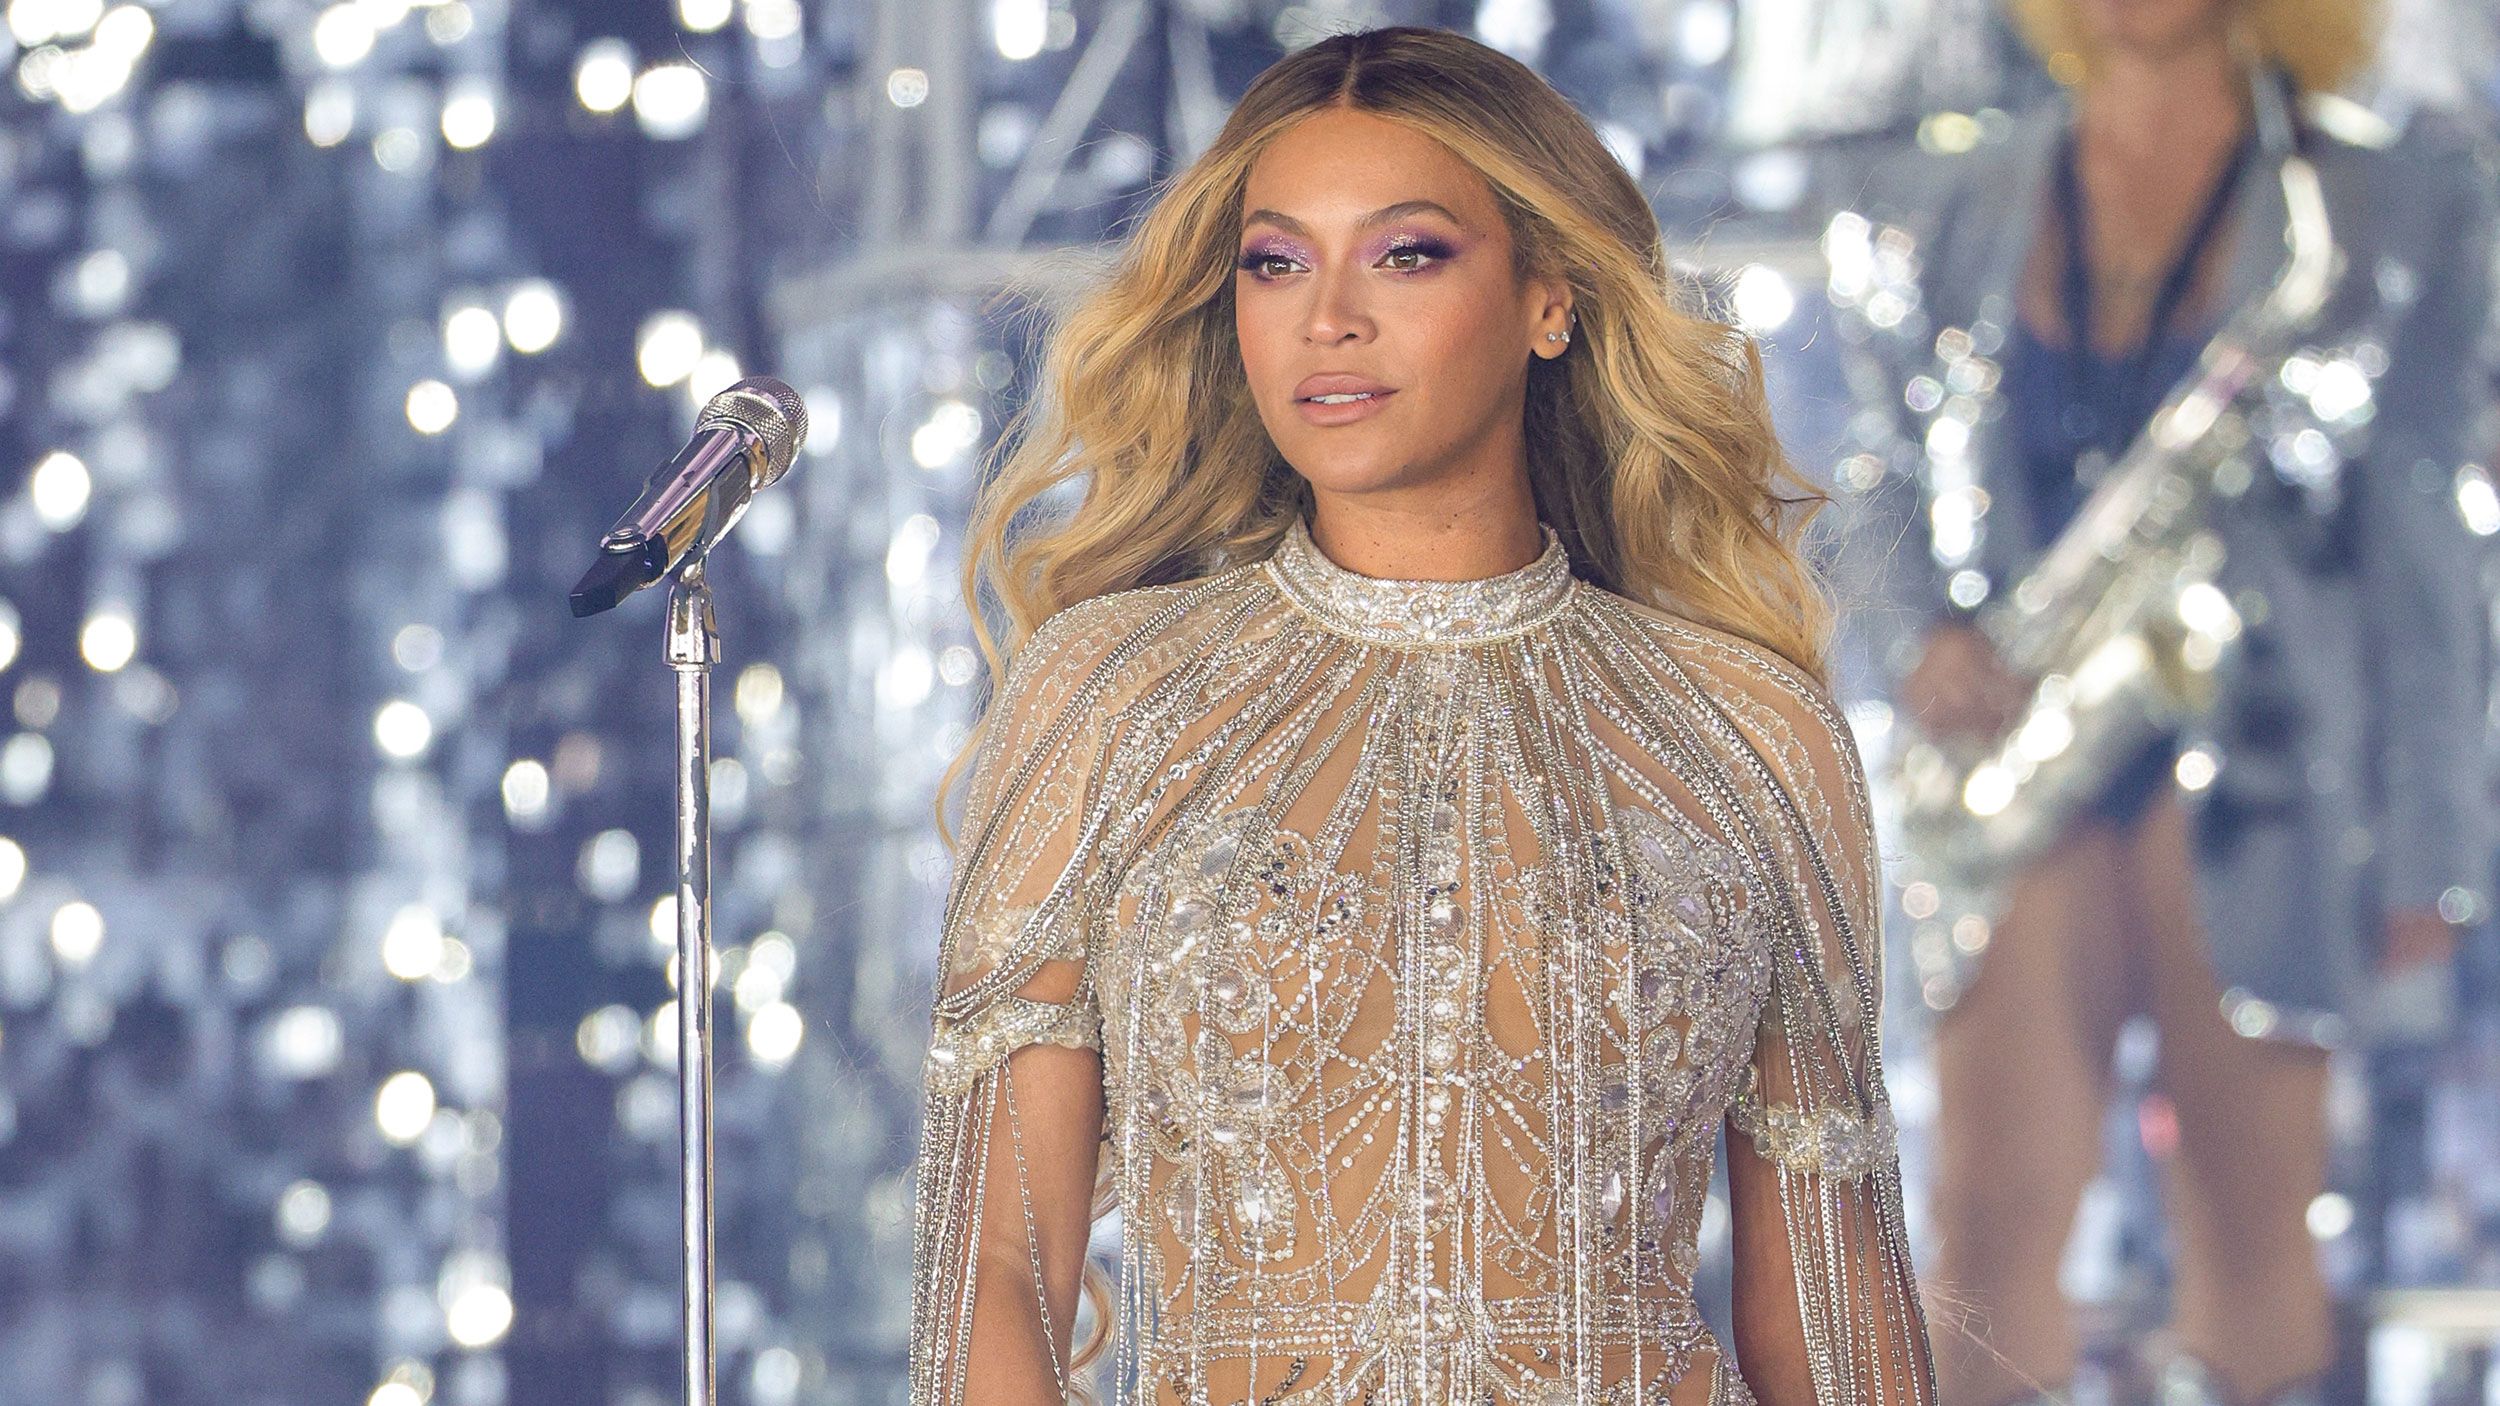 Beyoncé helps choose the perfect wedding song for 'Renaissance